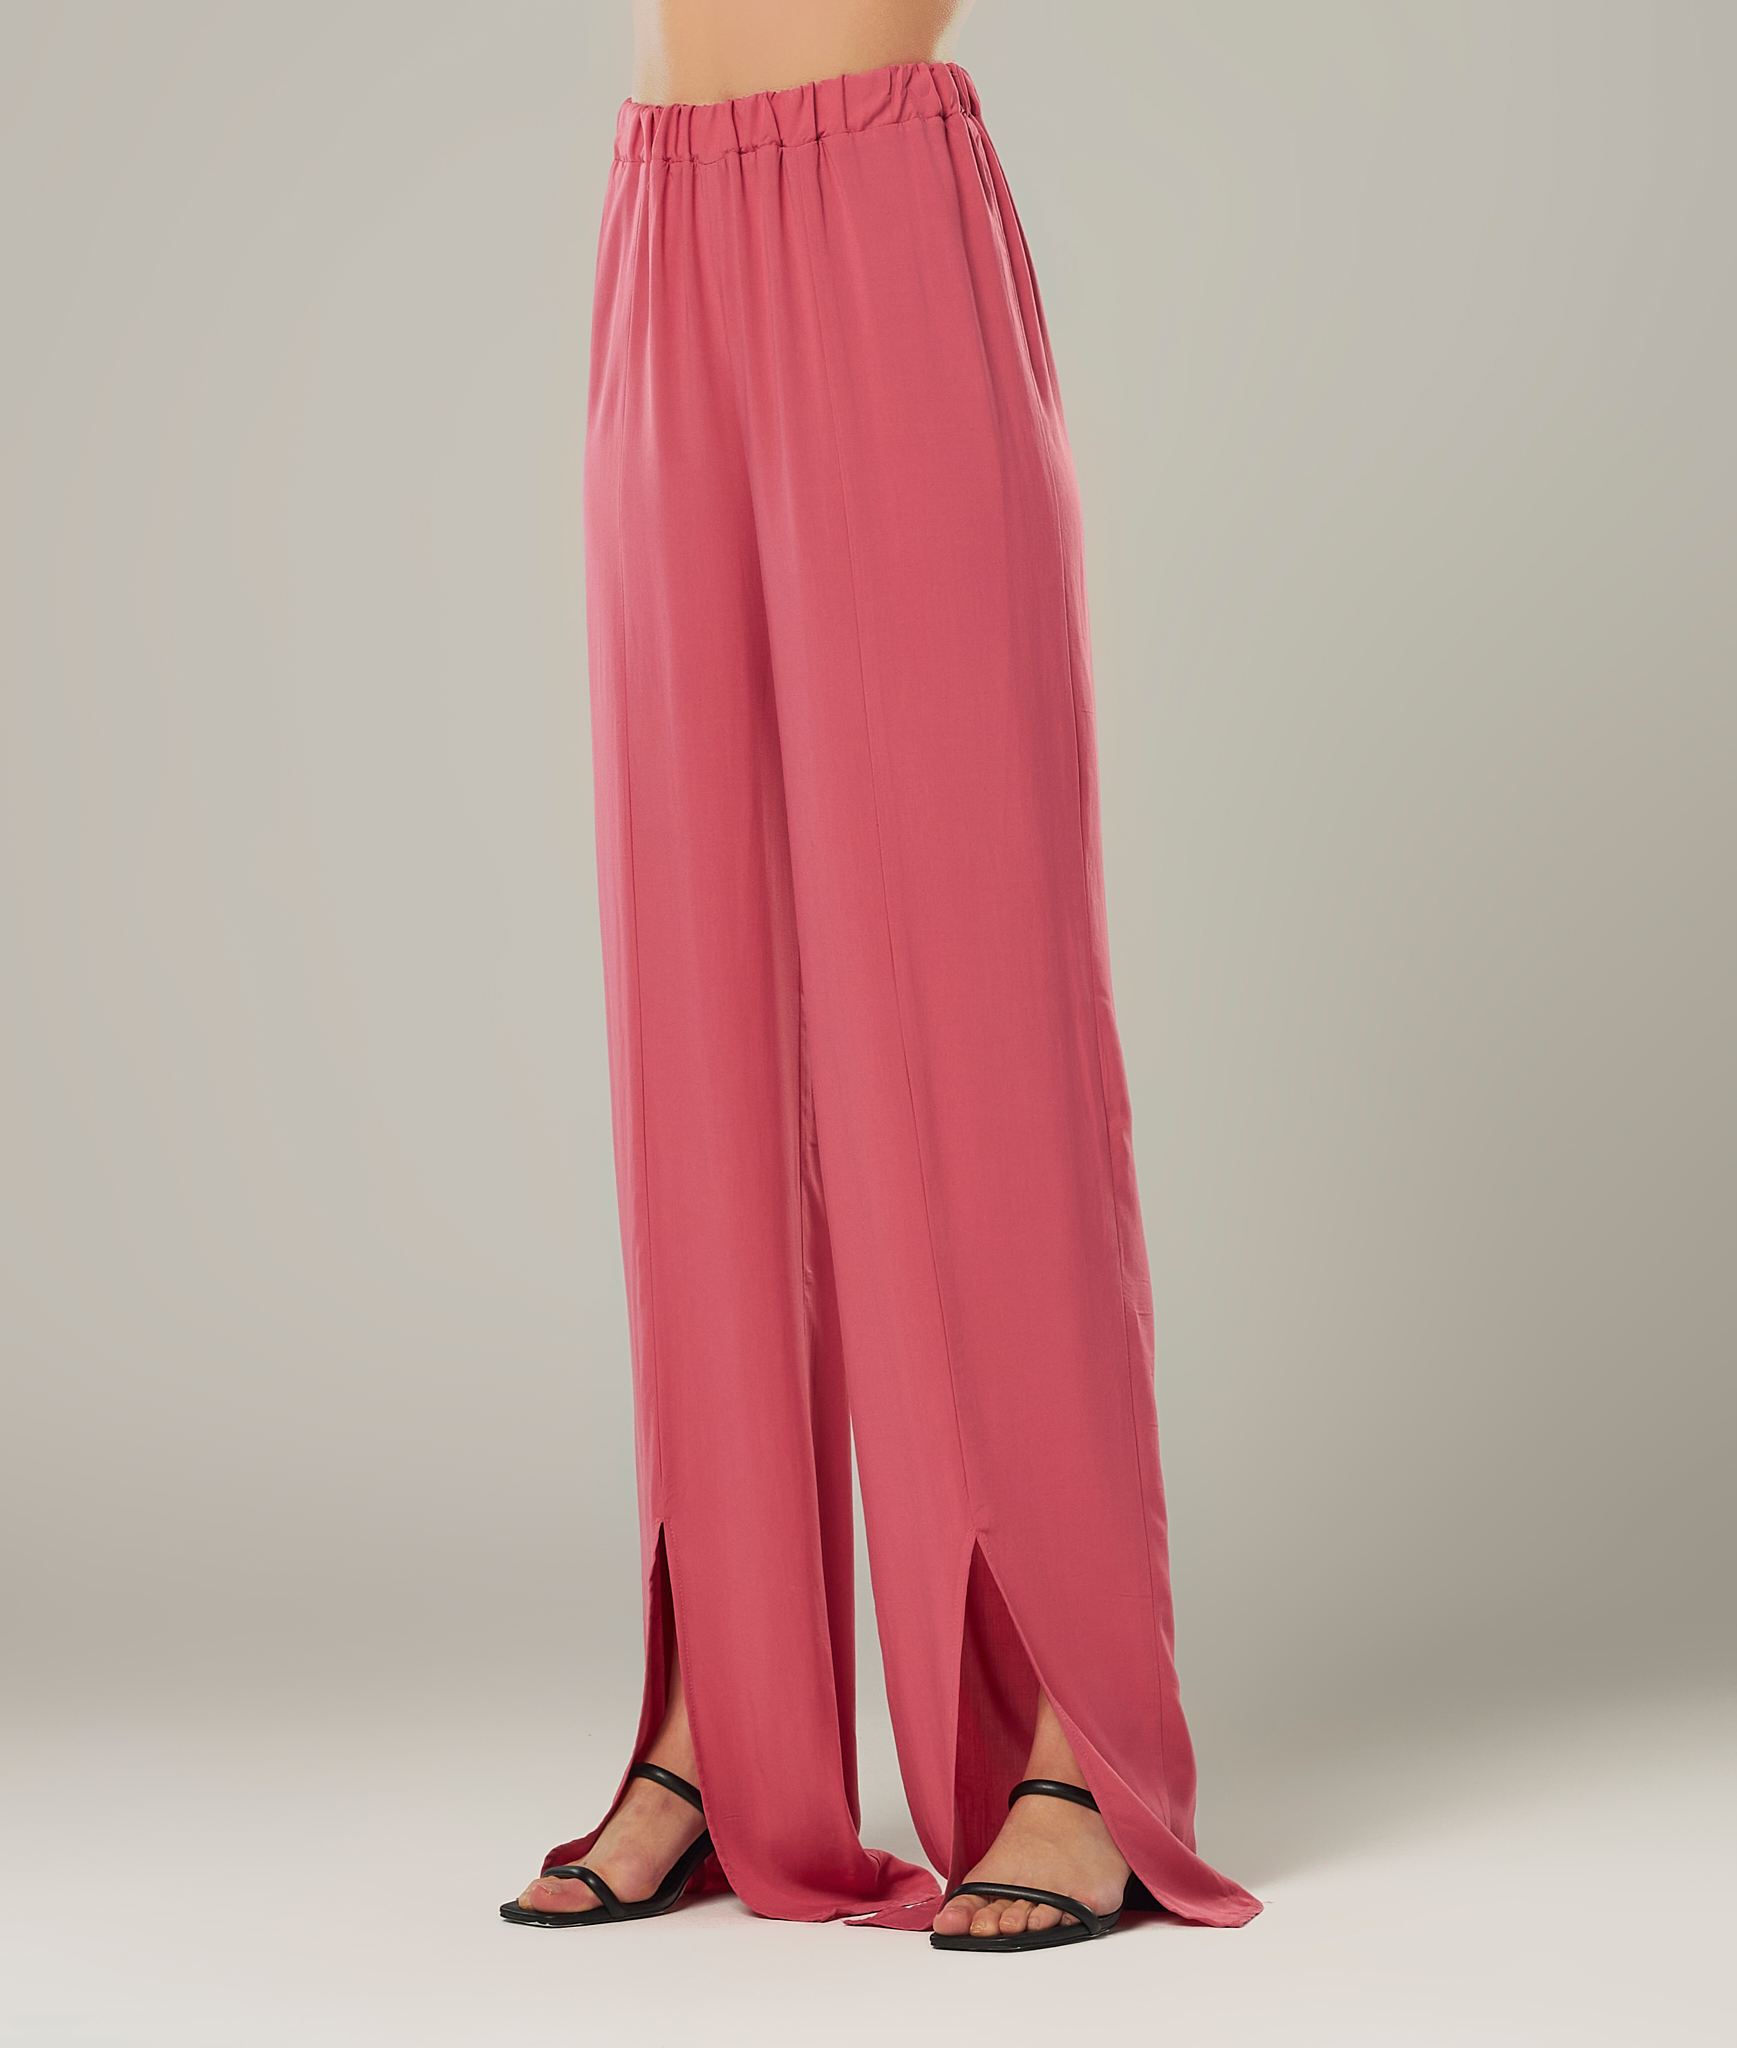 Gilda Dusty Pink Trousers